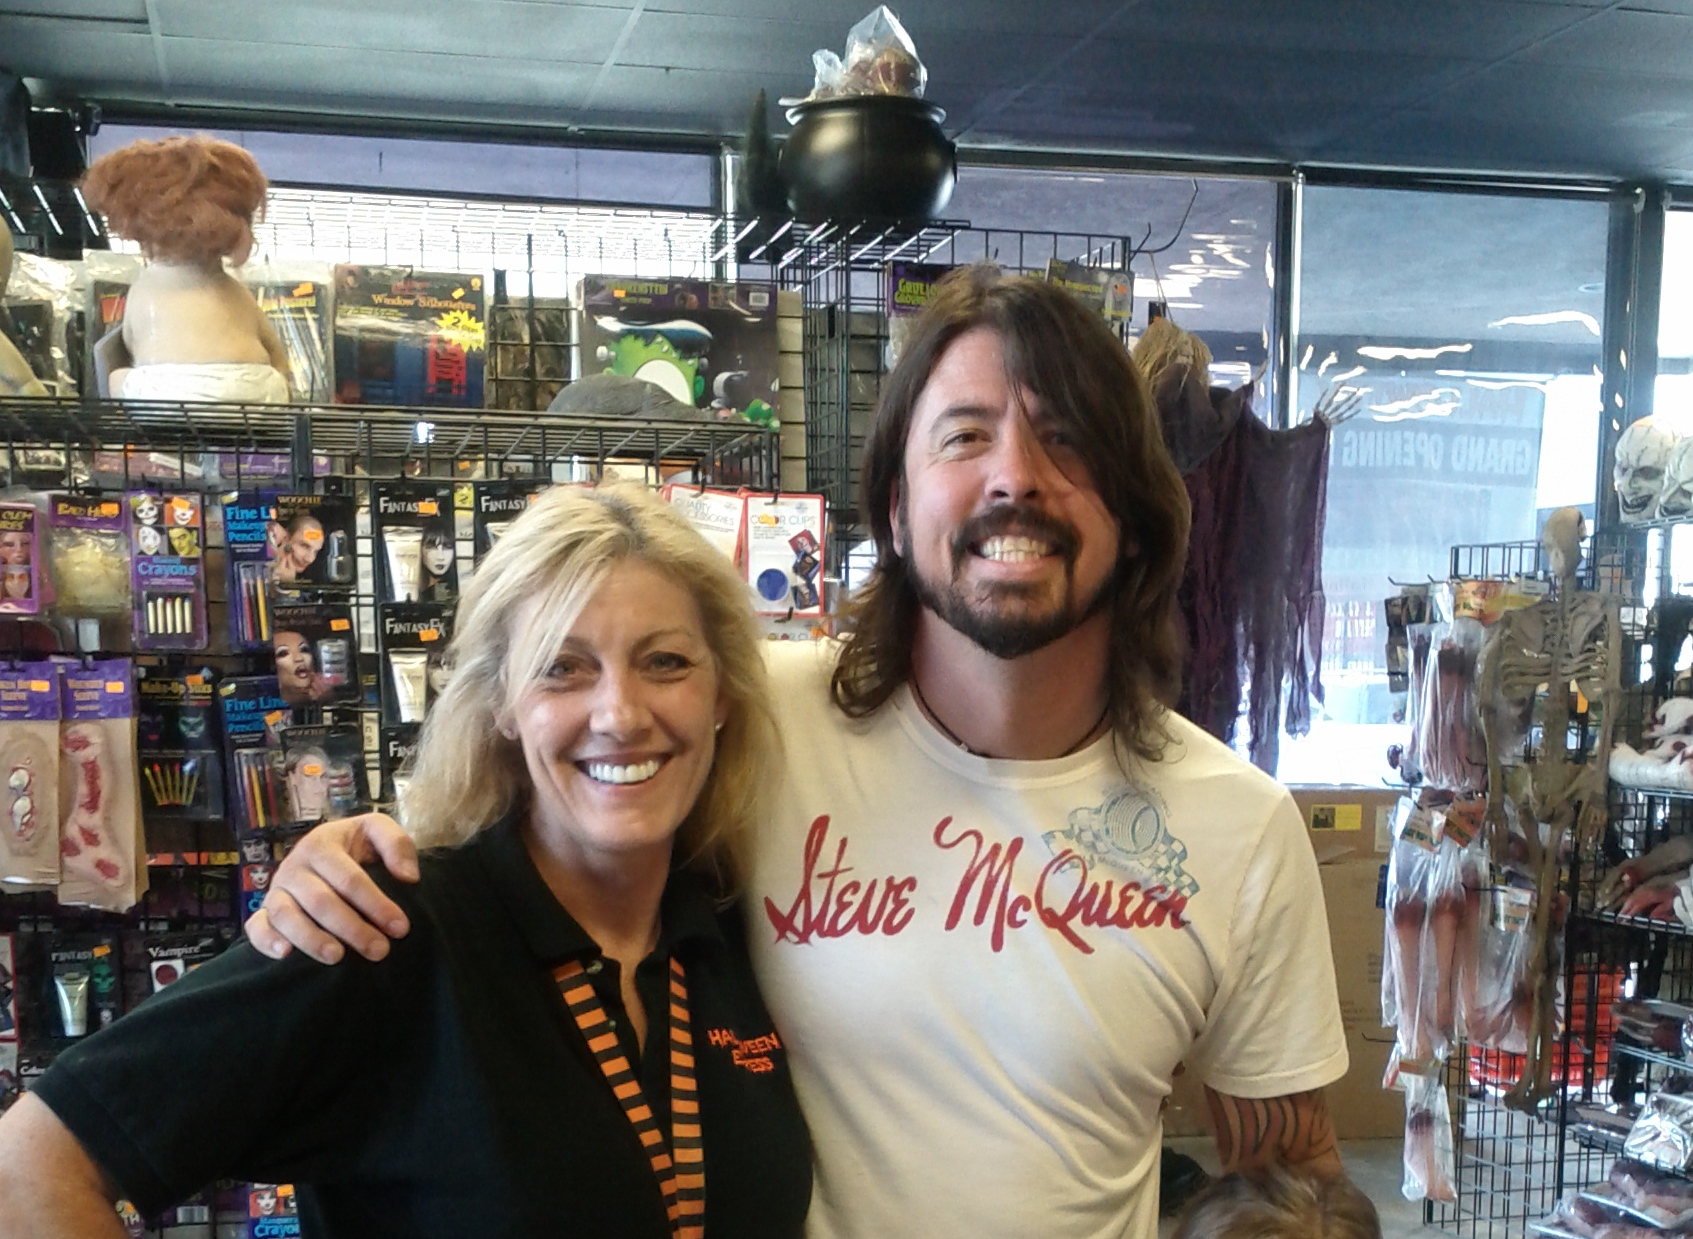 Dave Grohl & daughter came shopping for Halloween.